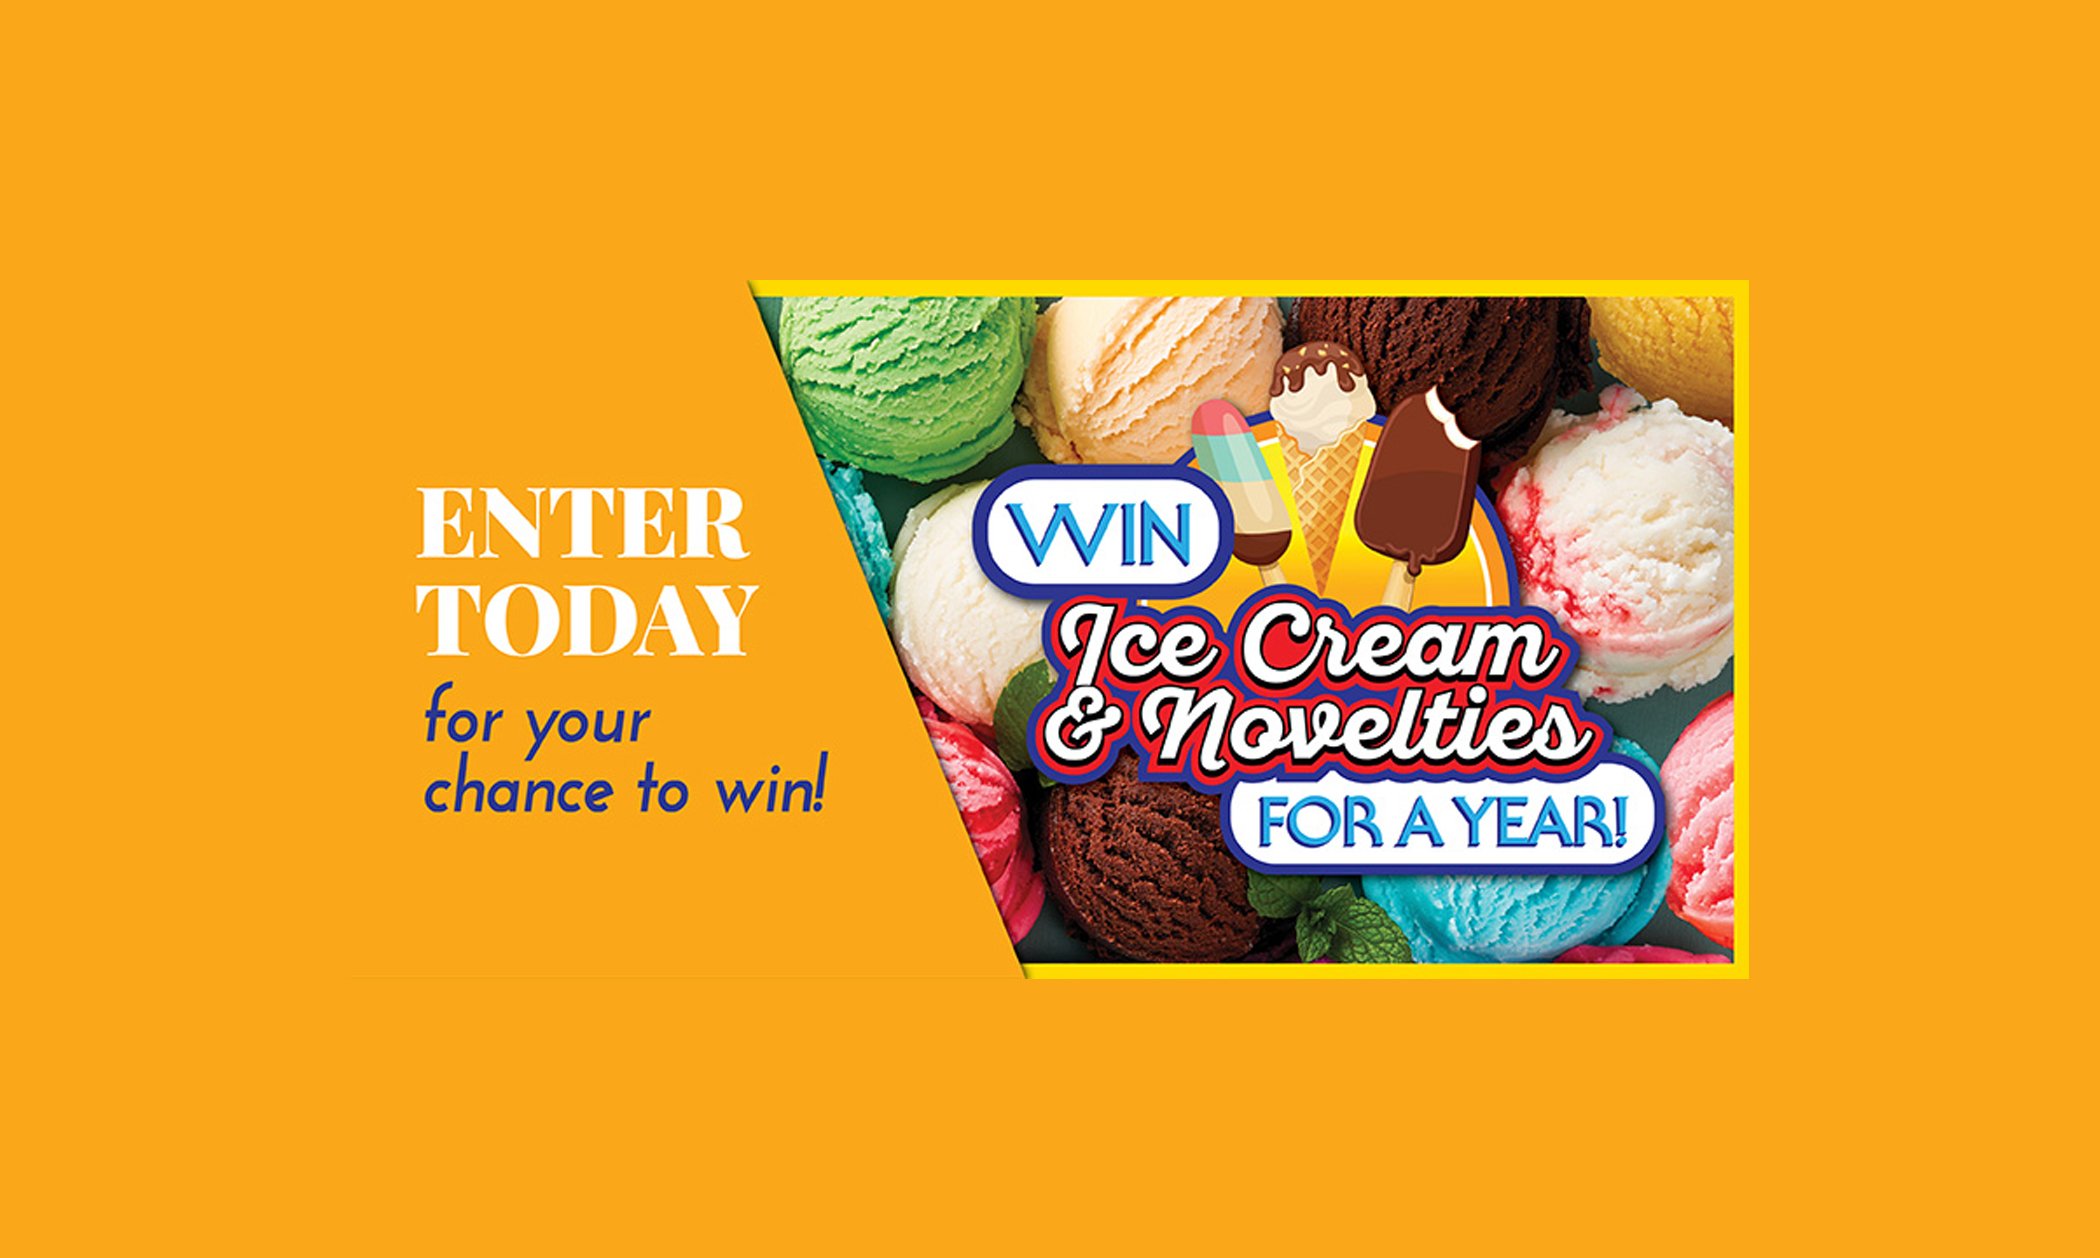 Enter for a Chance to Win a Year of Ice Cream Novelty Treats!